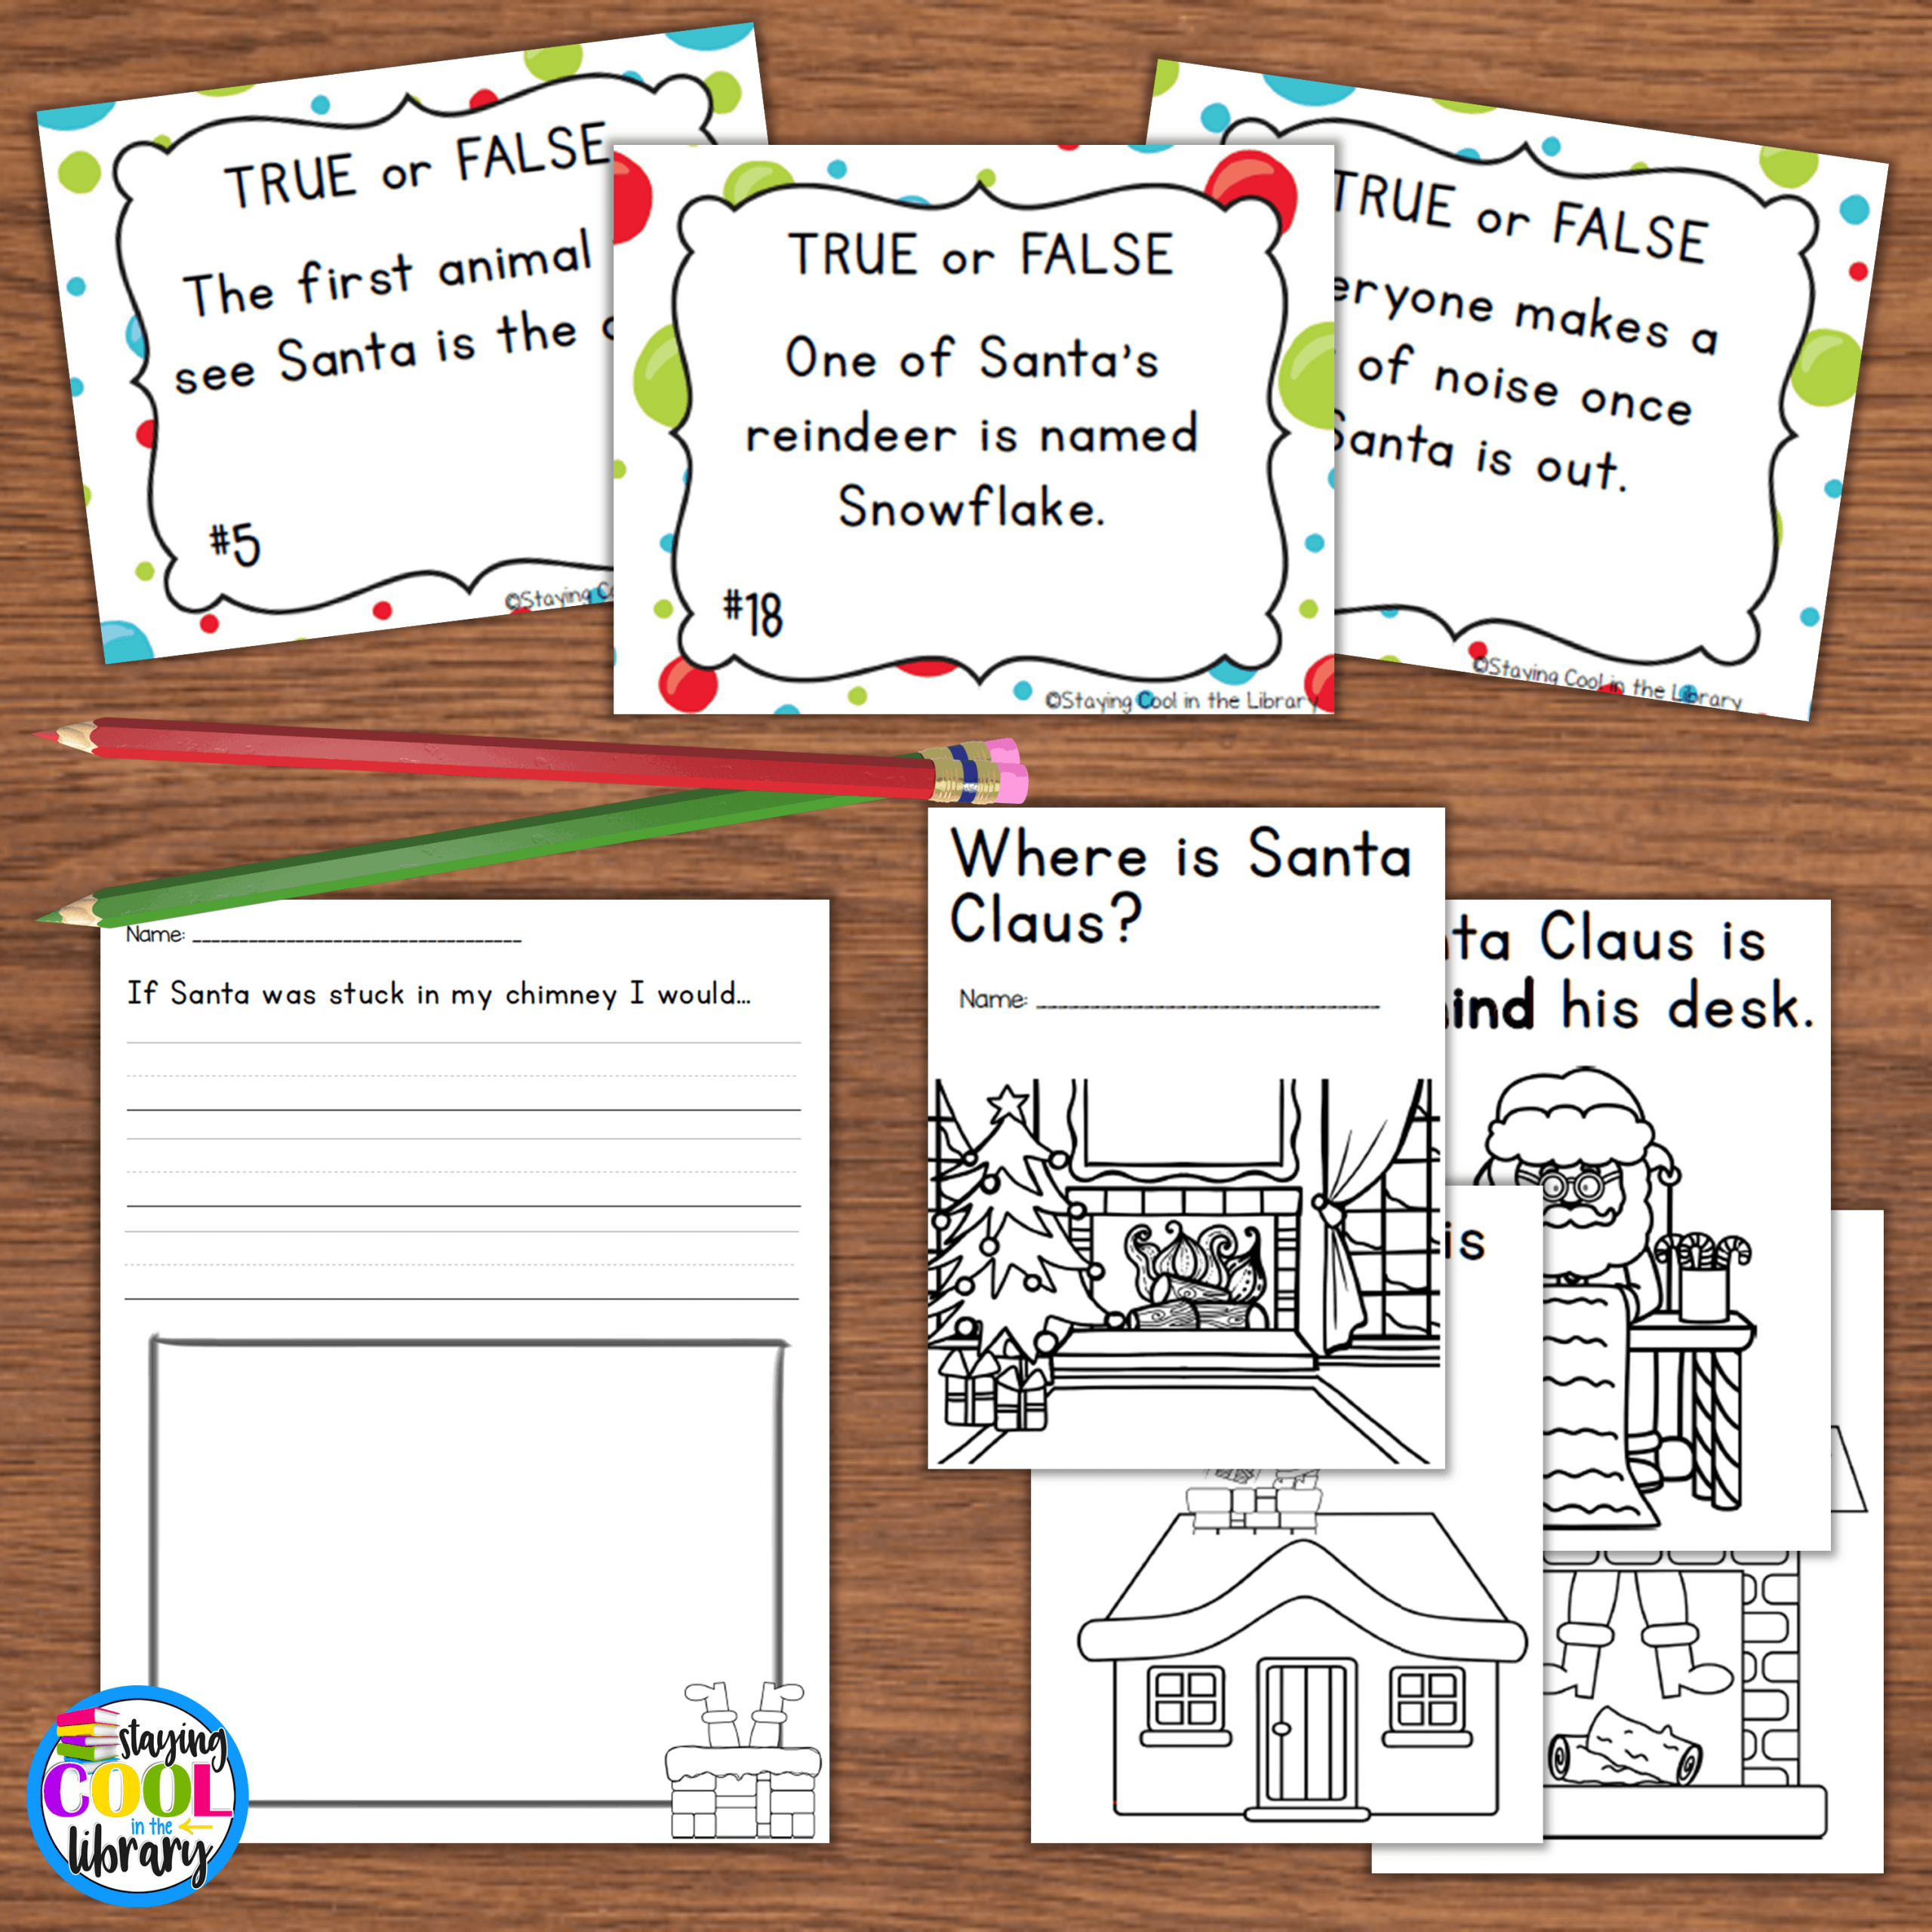 5 Free Downloadable Christmas Lesson Plans! - Staying Cool